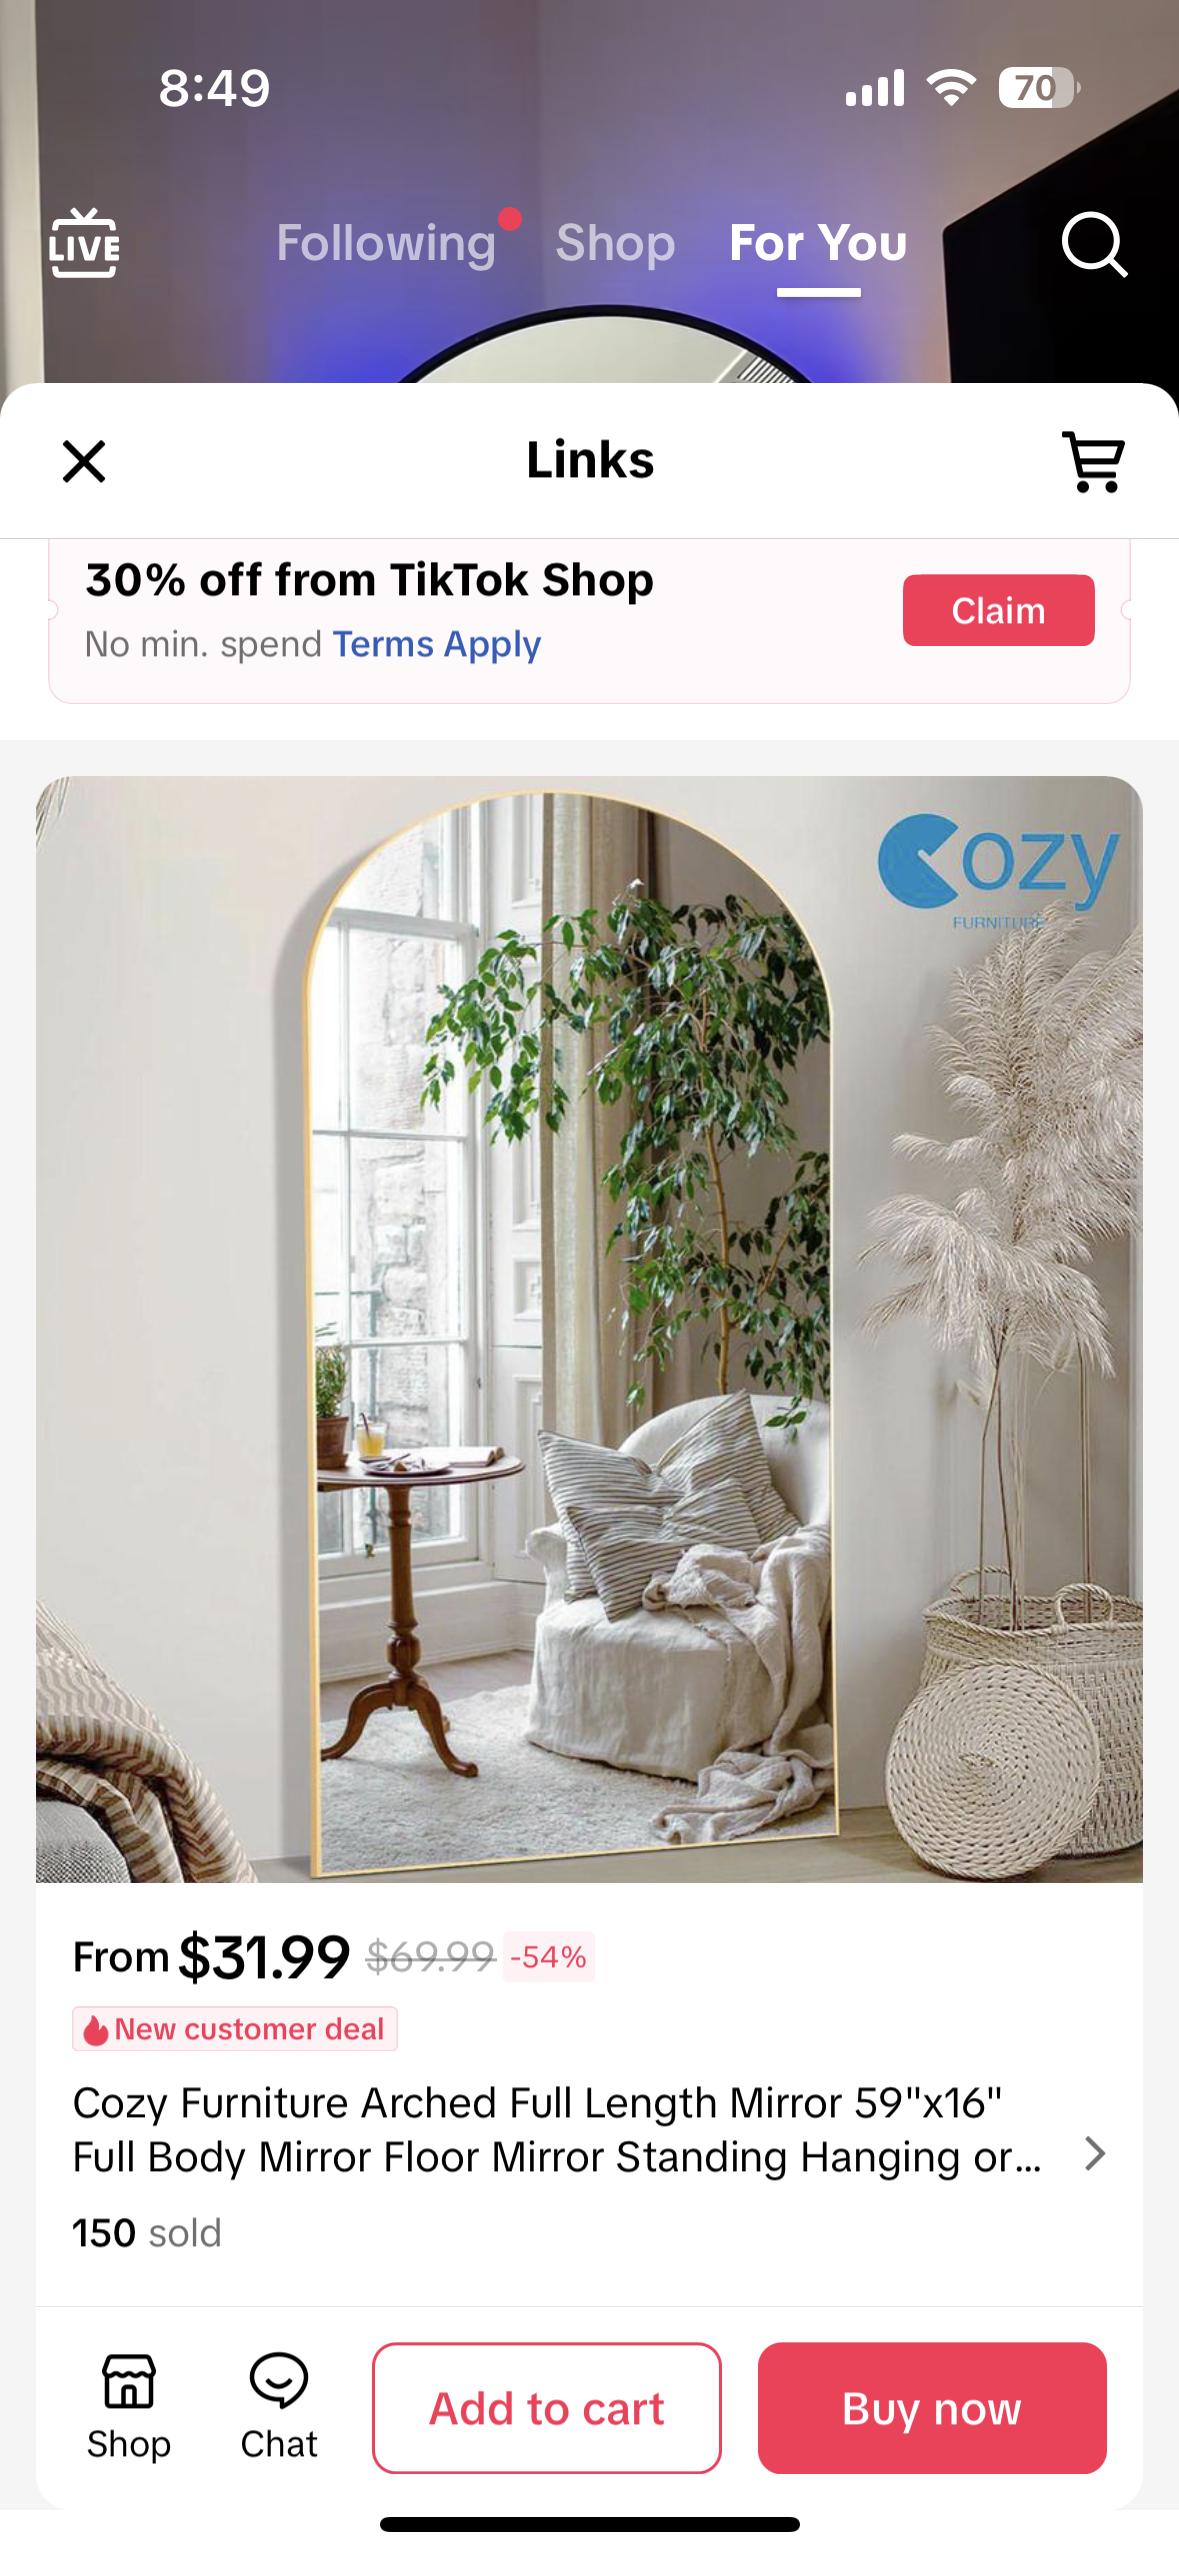 A listing for a full-length arched mirror on TikTok Shop. The listing features a 30% off promotion and several buttons including "buy now" and "add to cart."